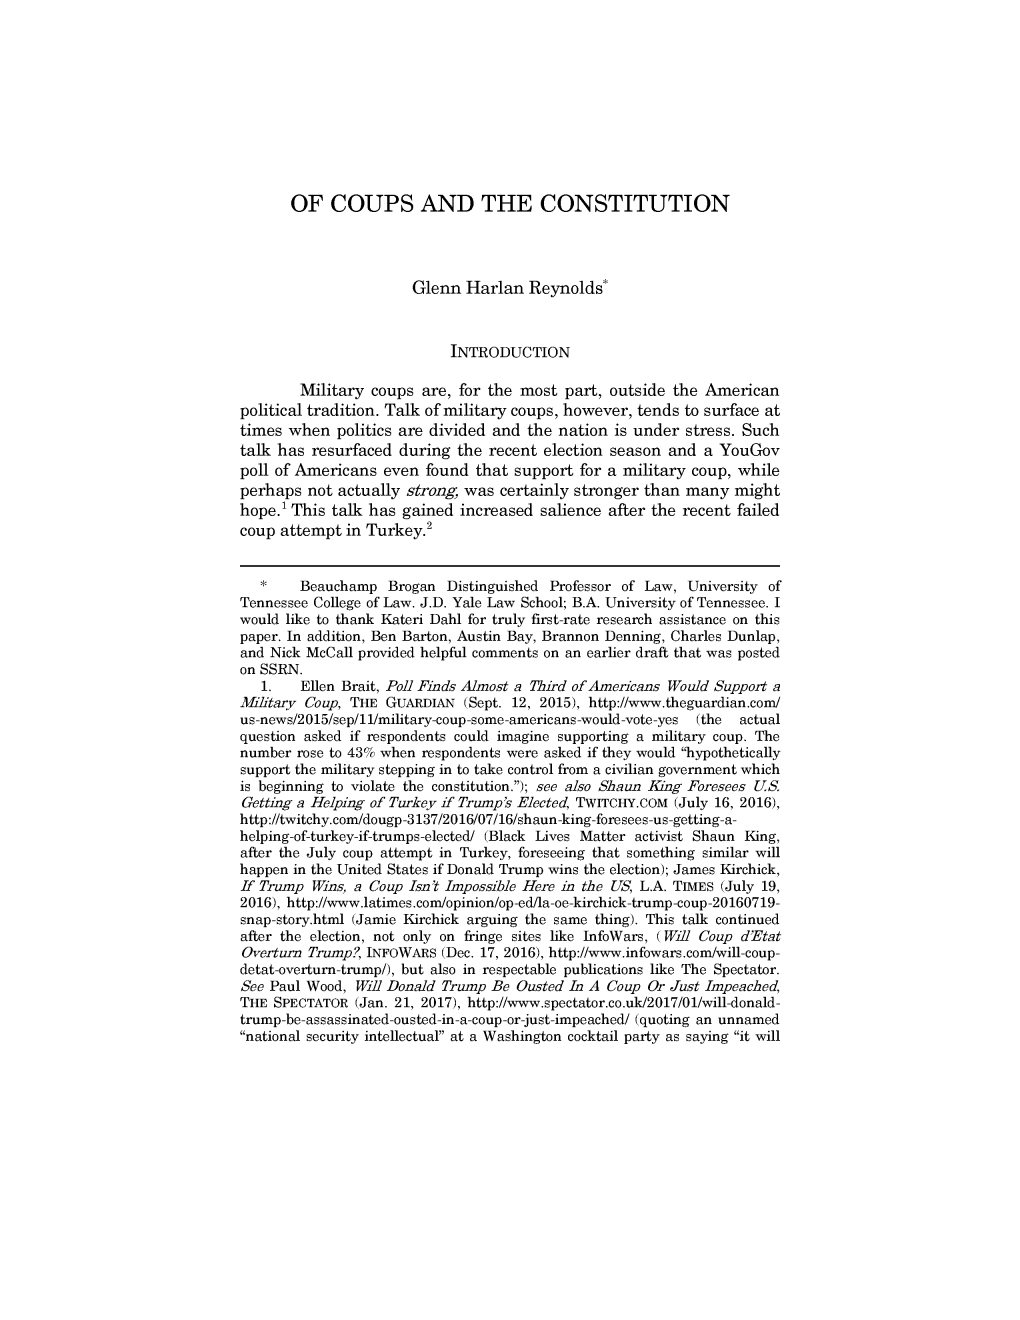 Of Coups and the Constitution